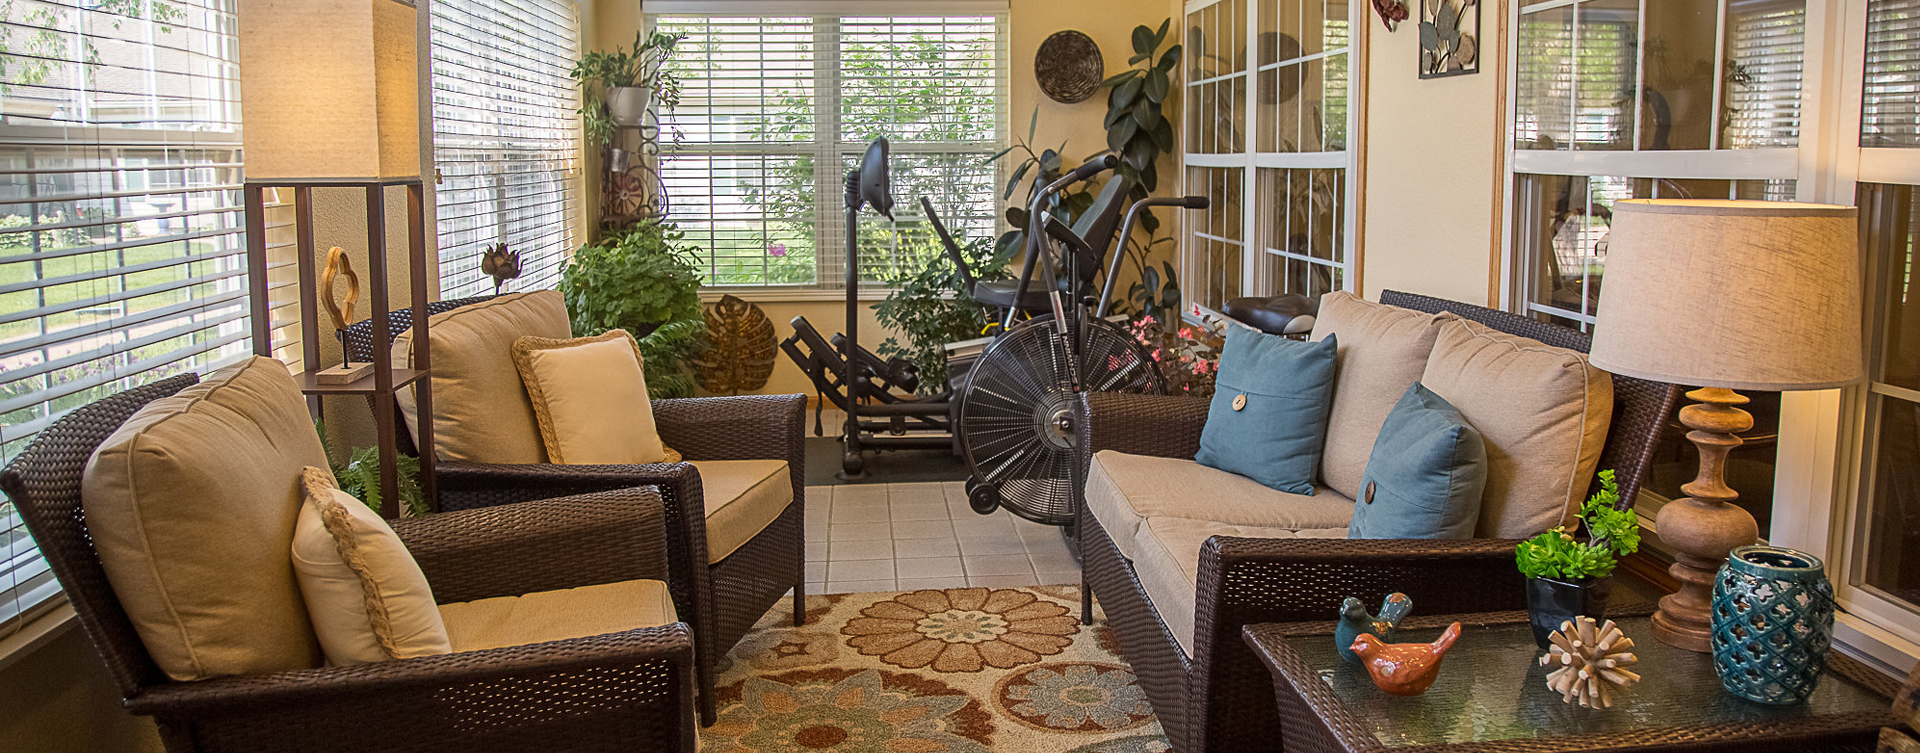 Enjoy the view of the outdoors from the sunroom at Bickford of Burlington